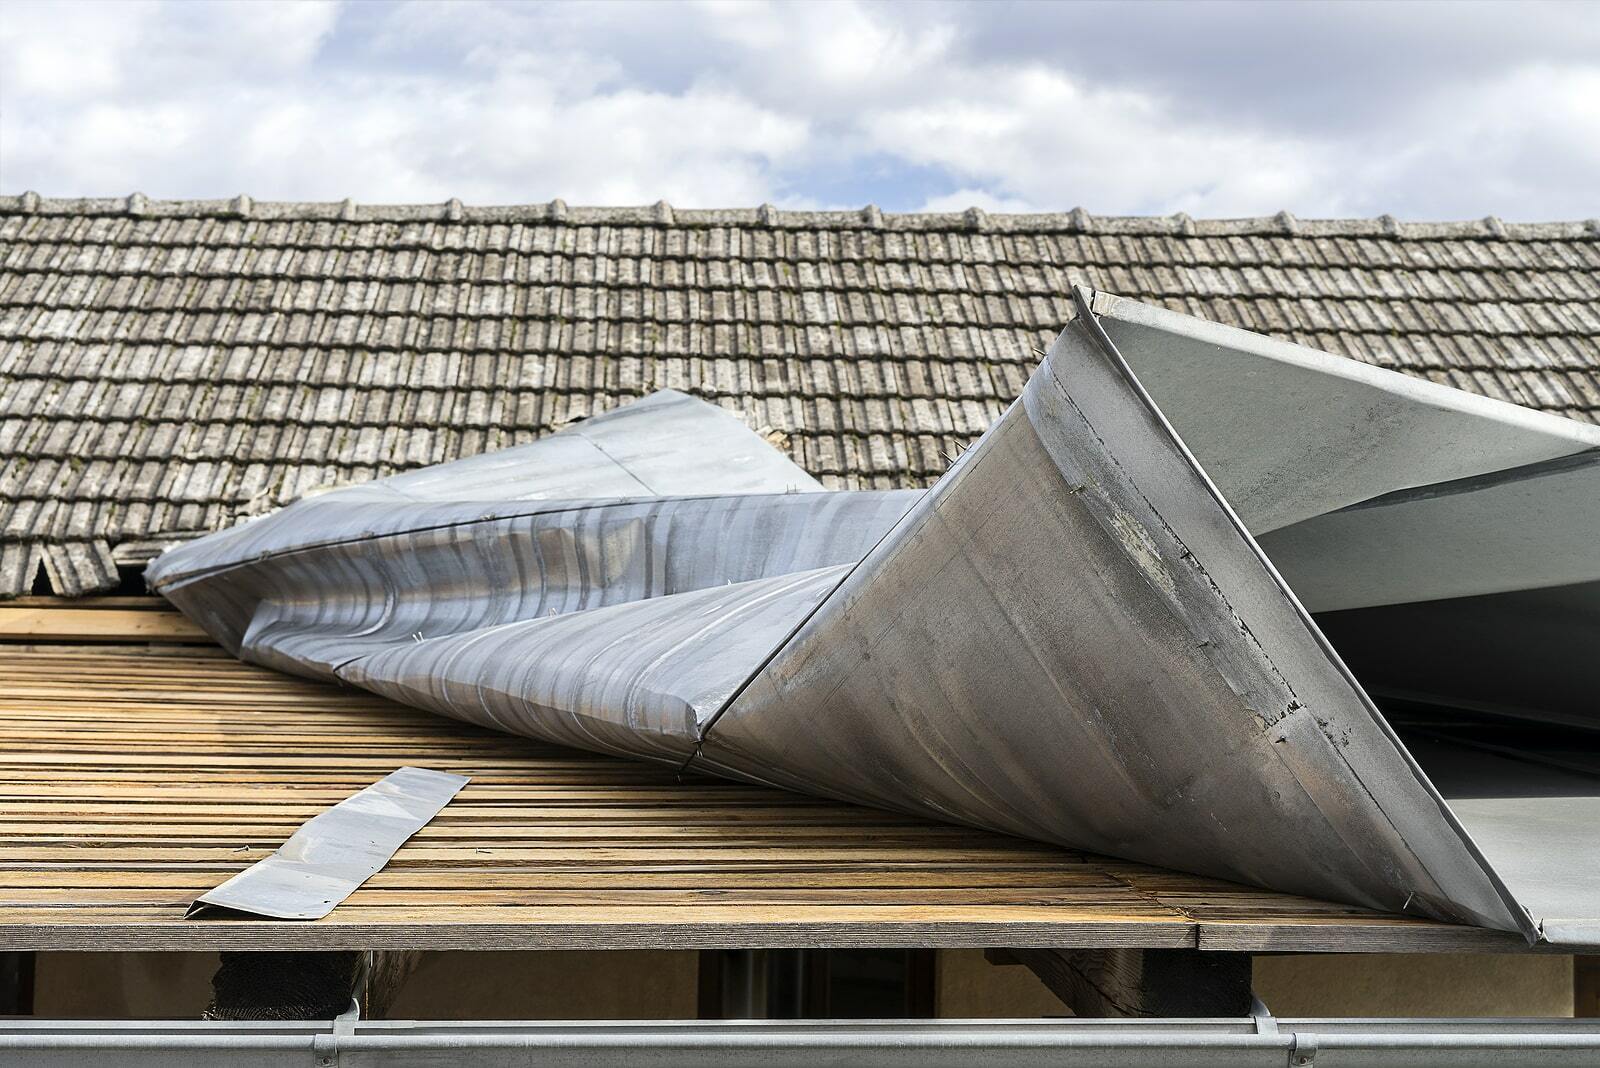 What Are The Disadvantages Of A Metal Roof?